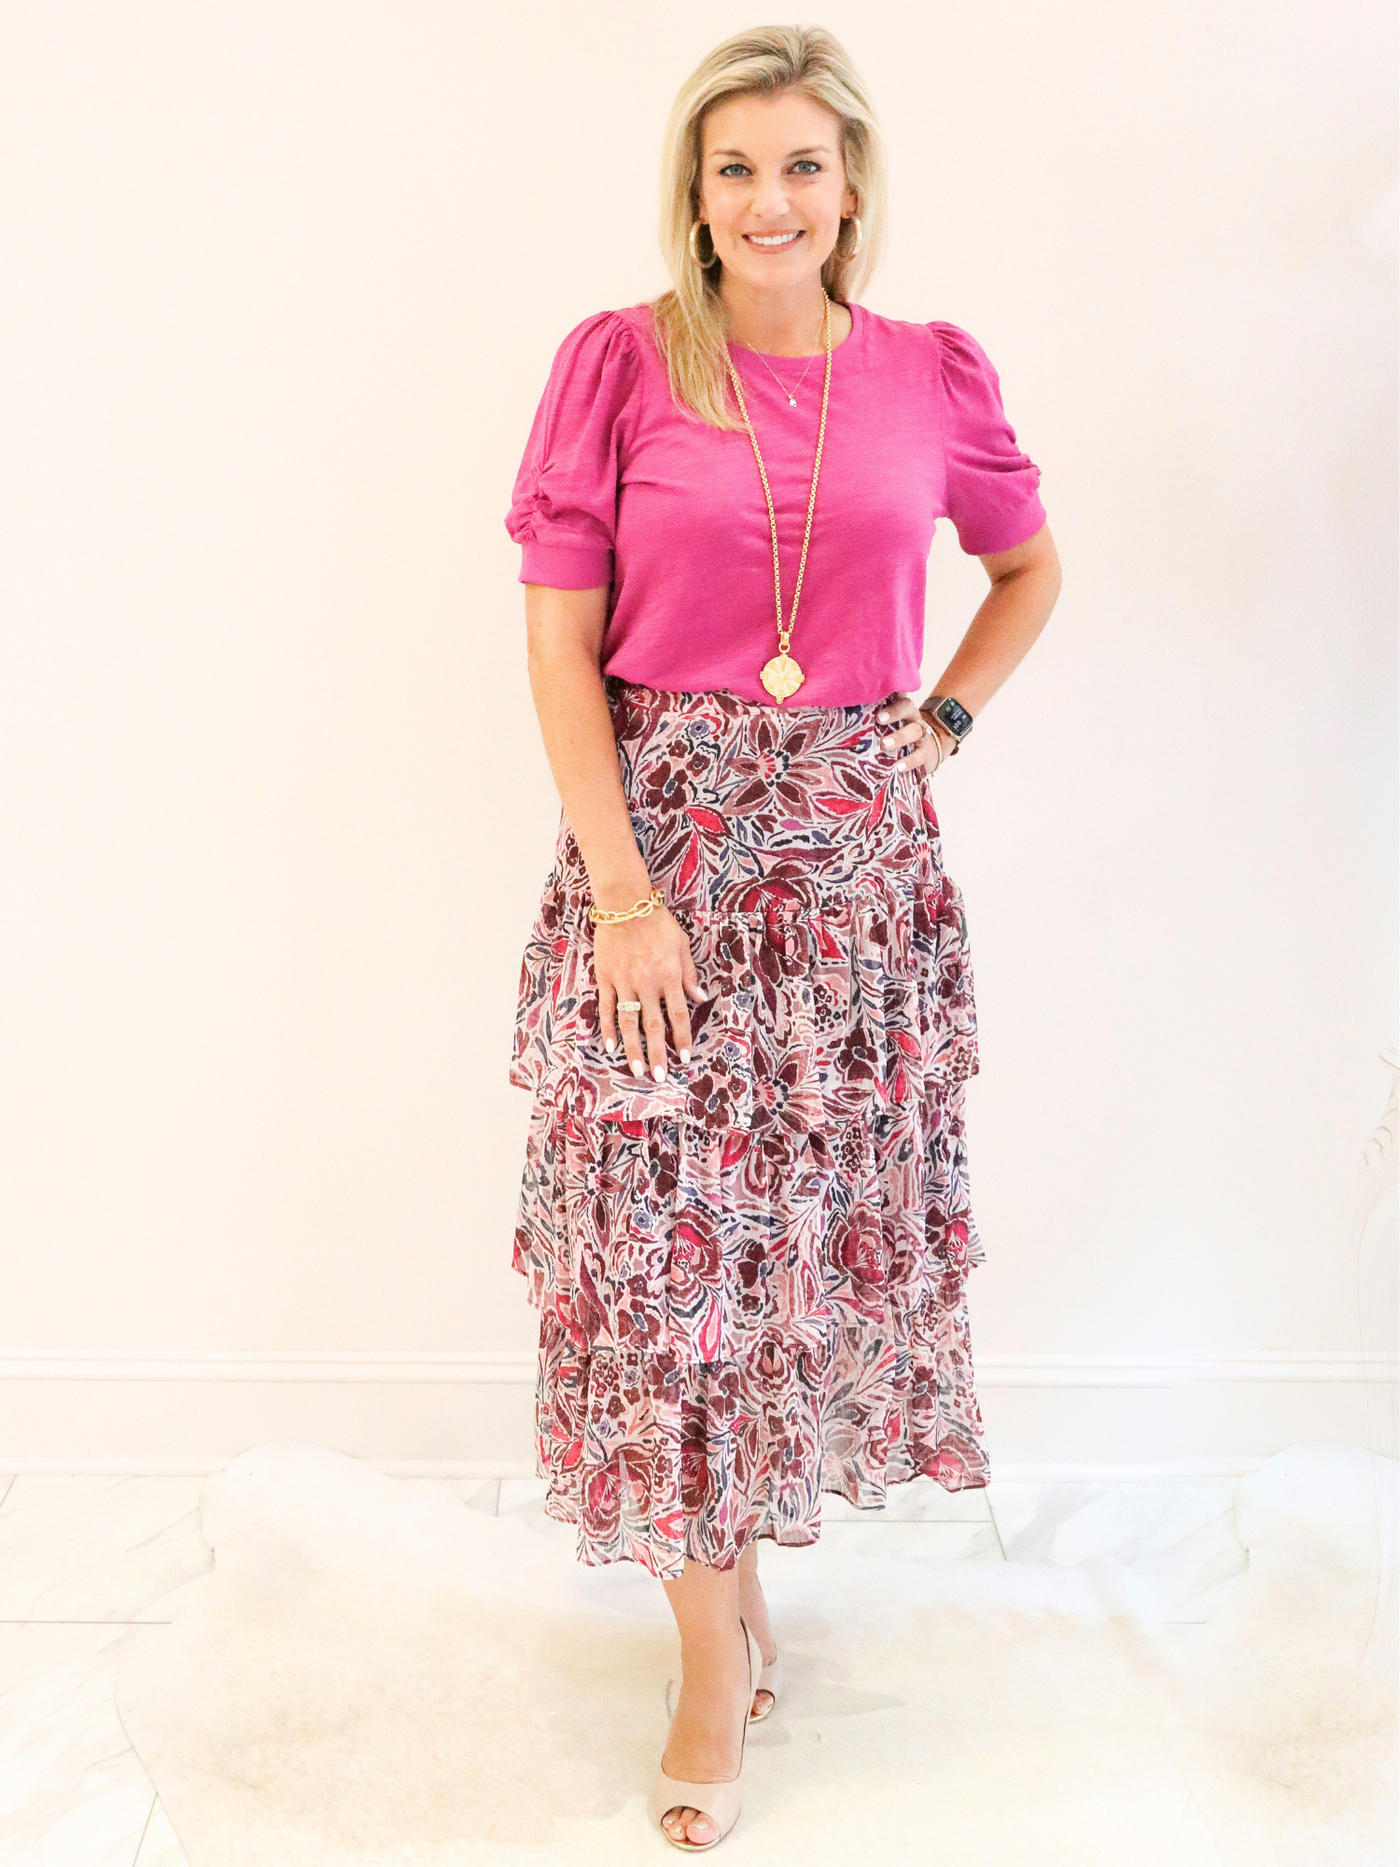 Orchid Ruched Sleeve Tee paired with matching skirt.